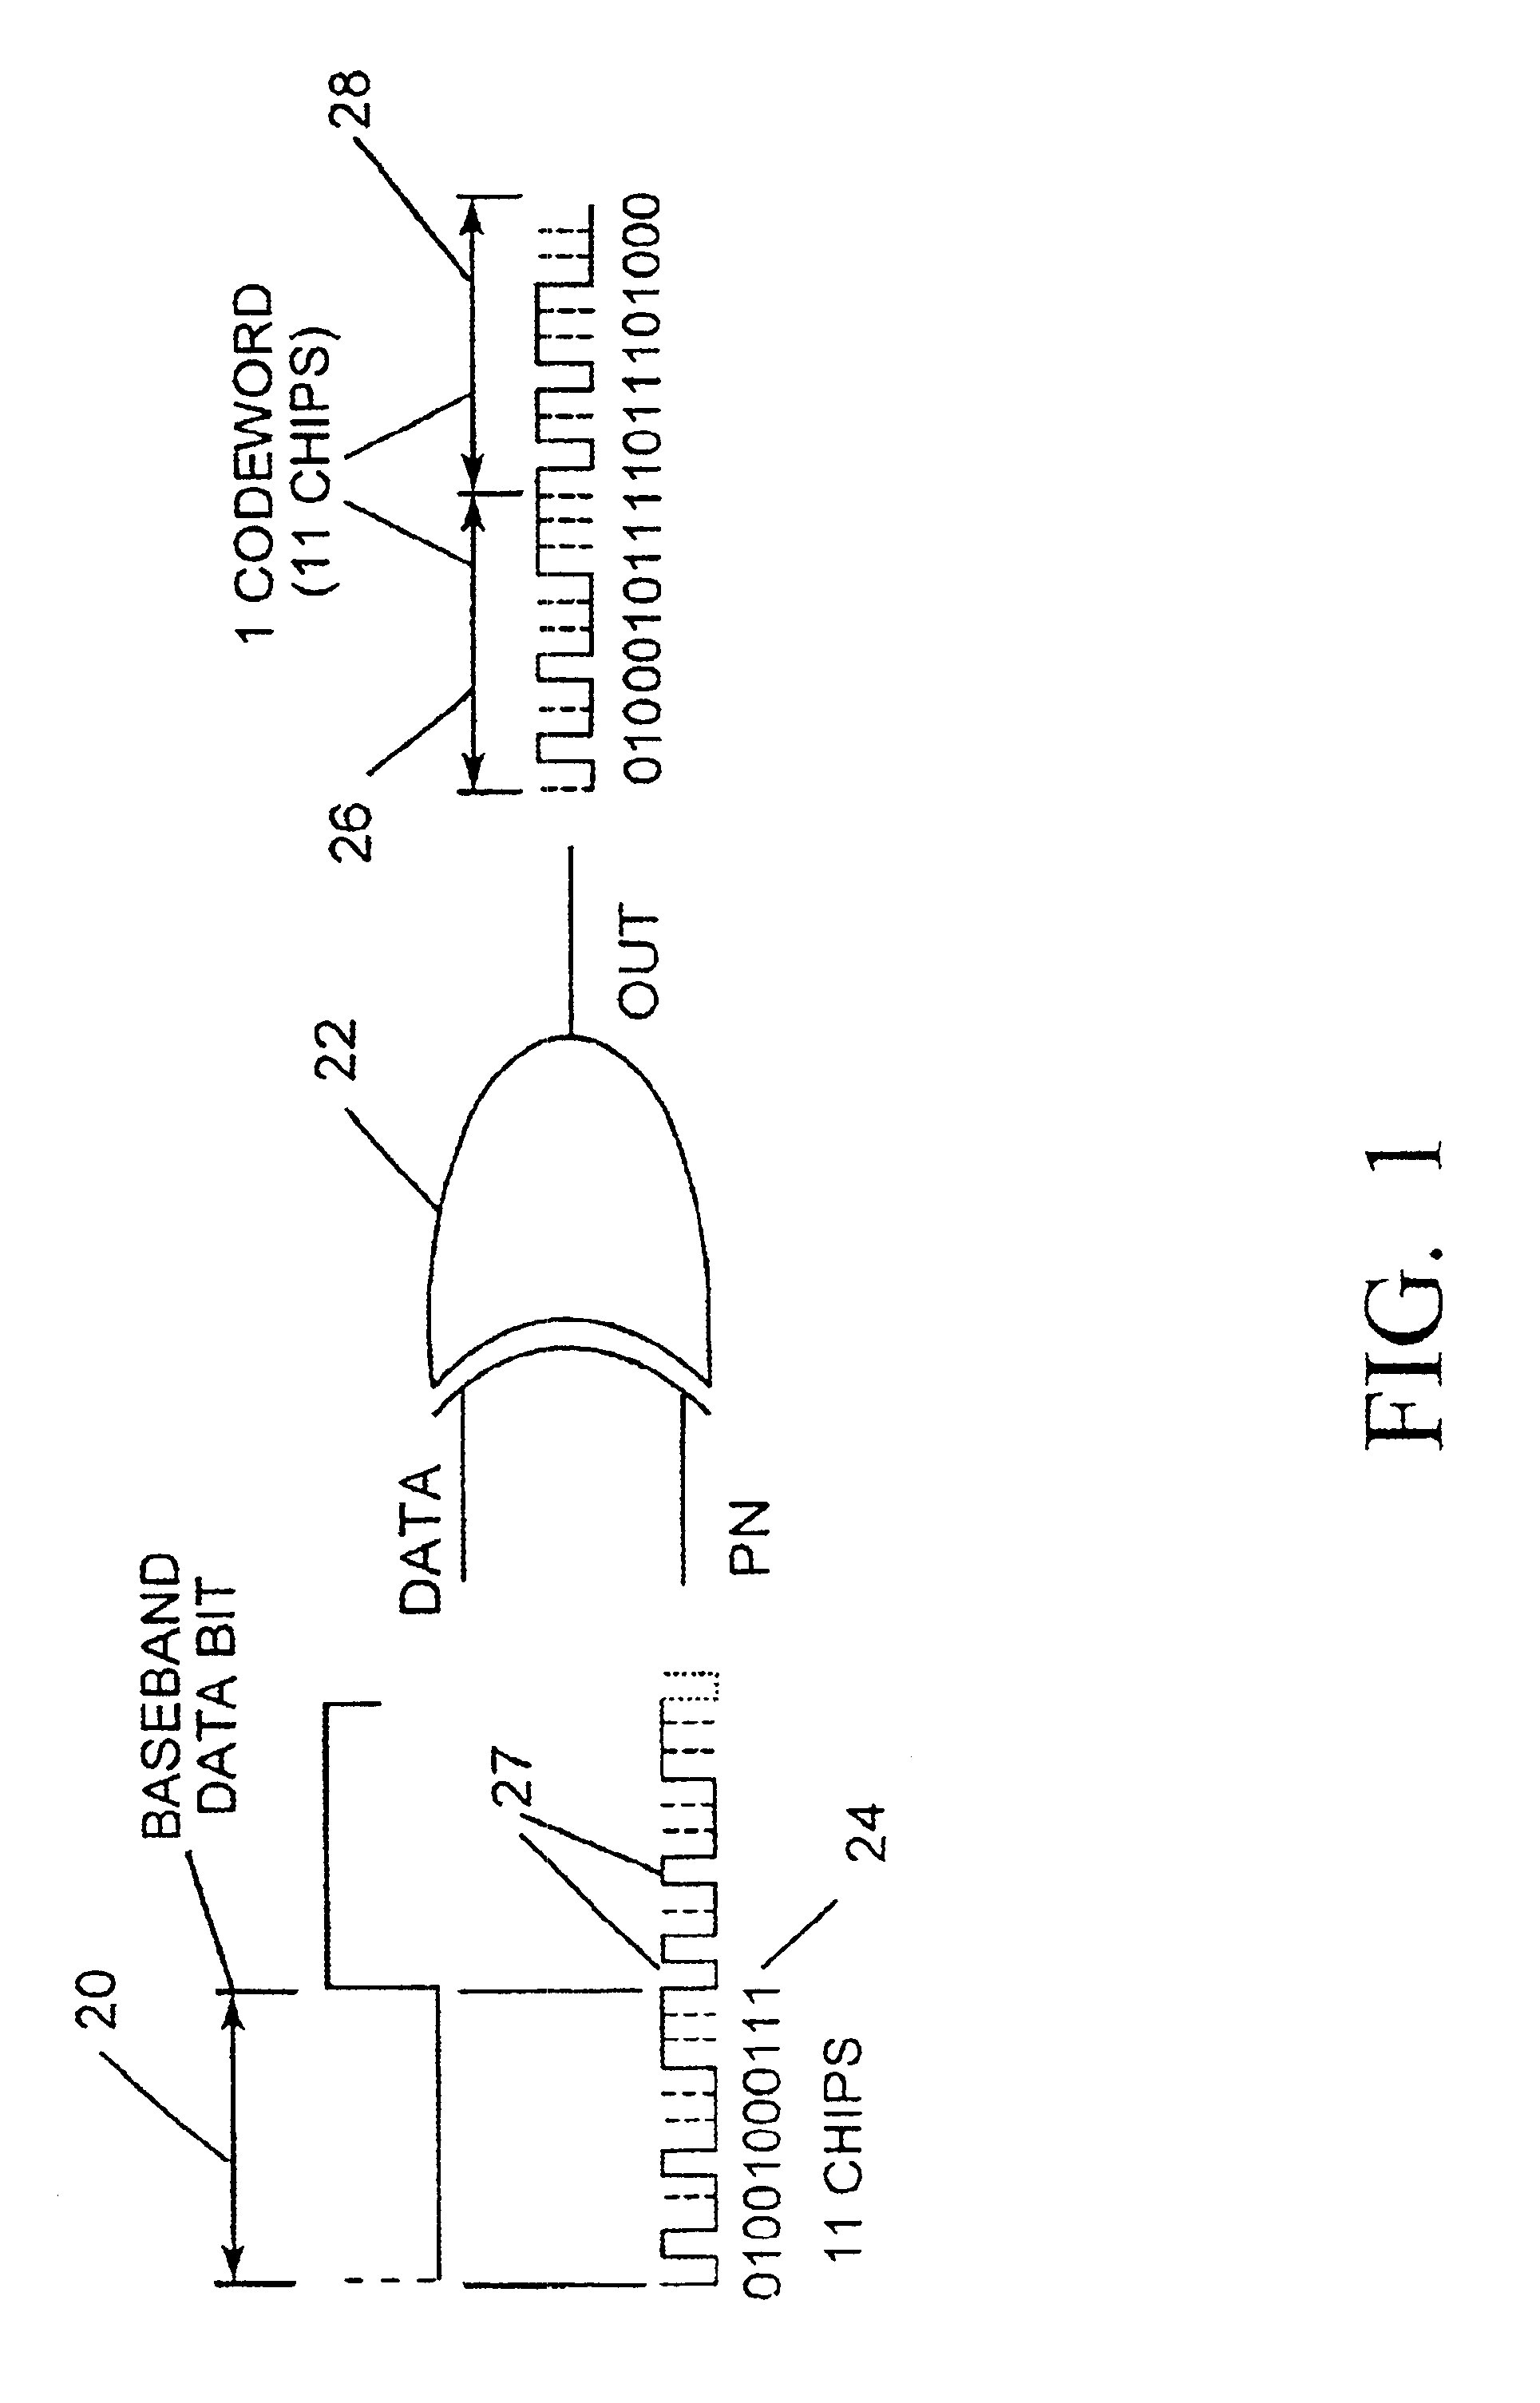 Extension of wireless local area network communication system to accommodate higher data rates while preserving legacy receiver features